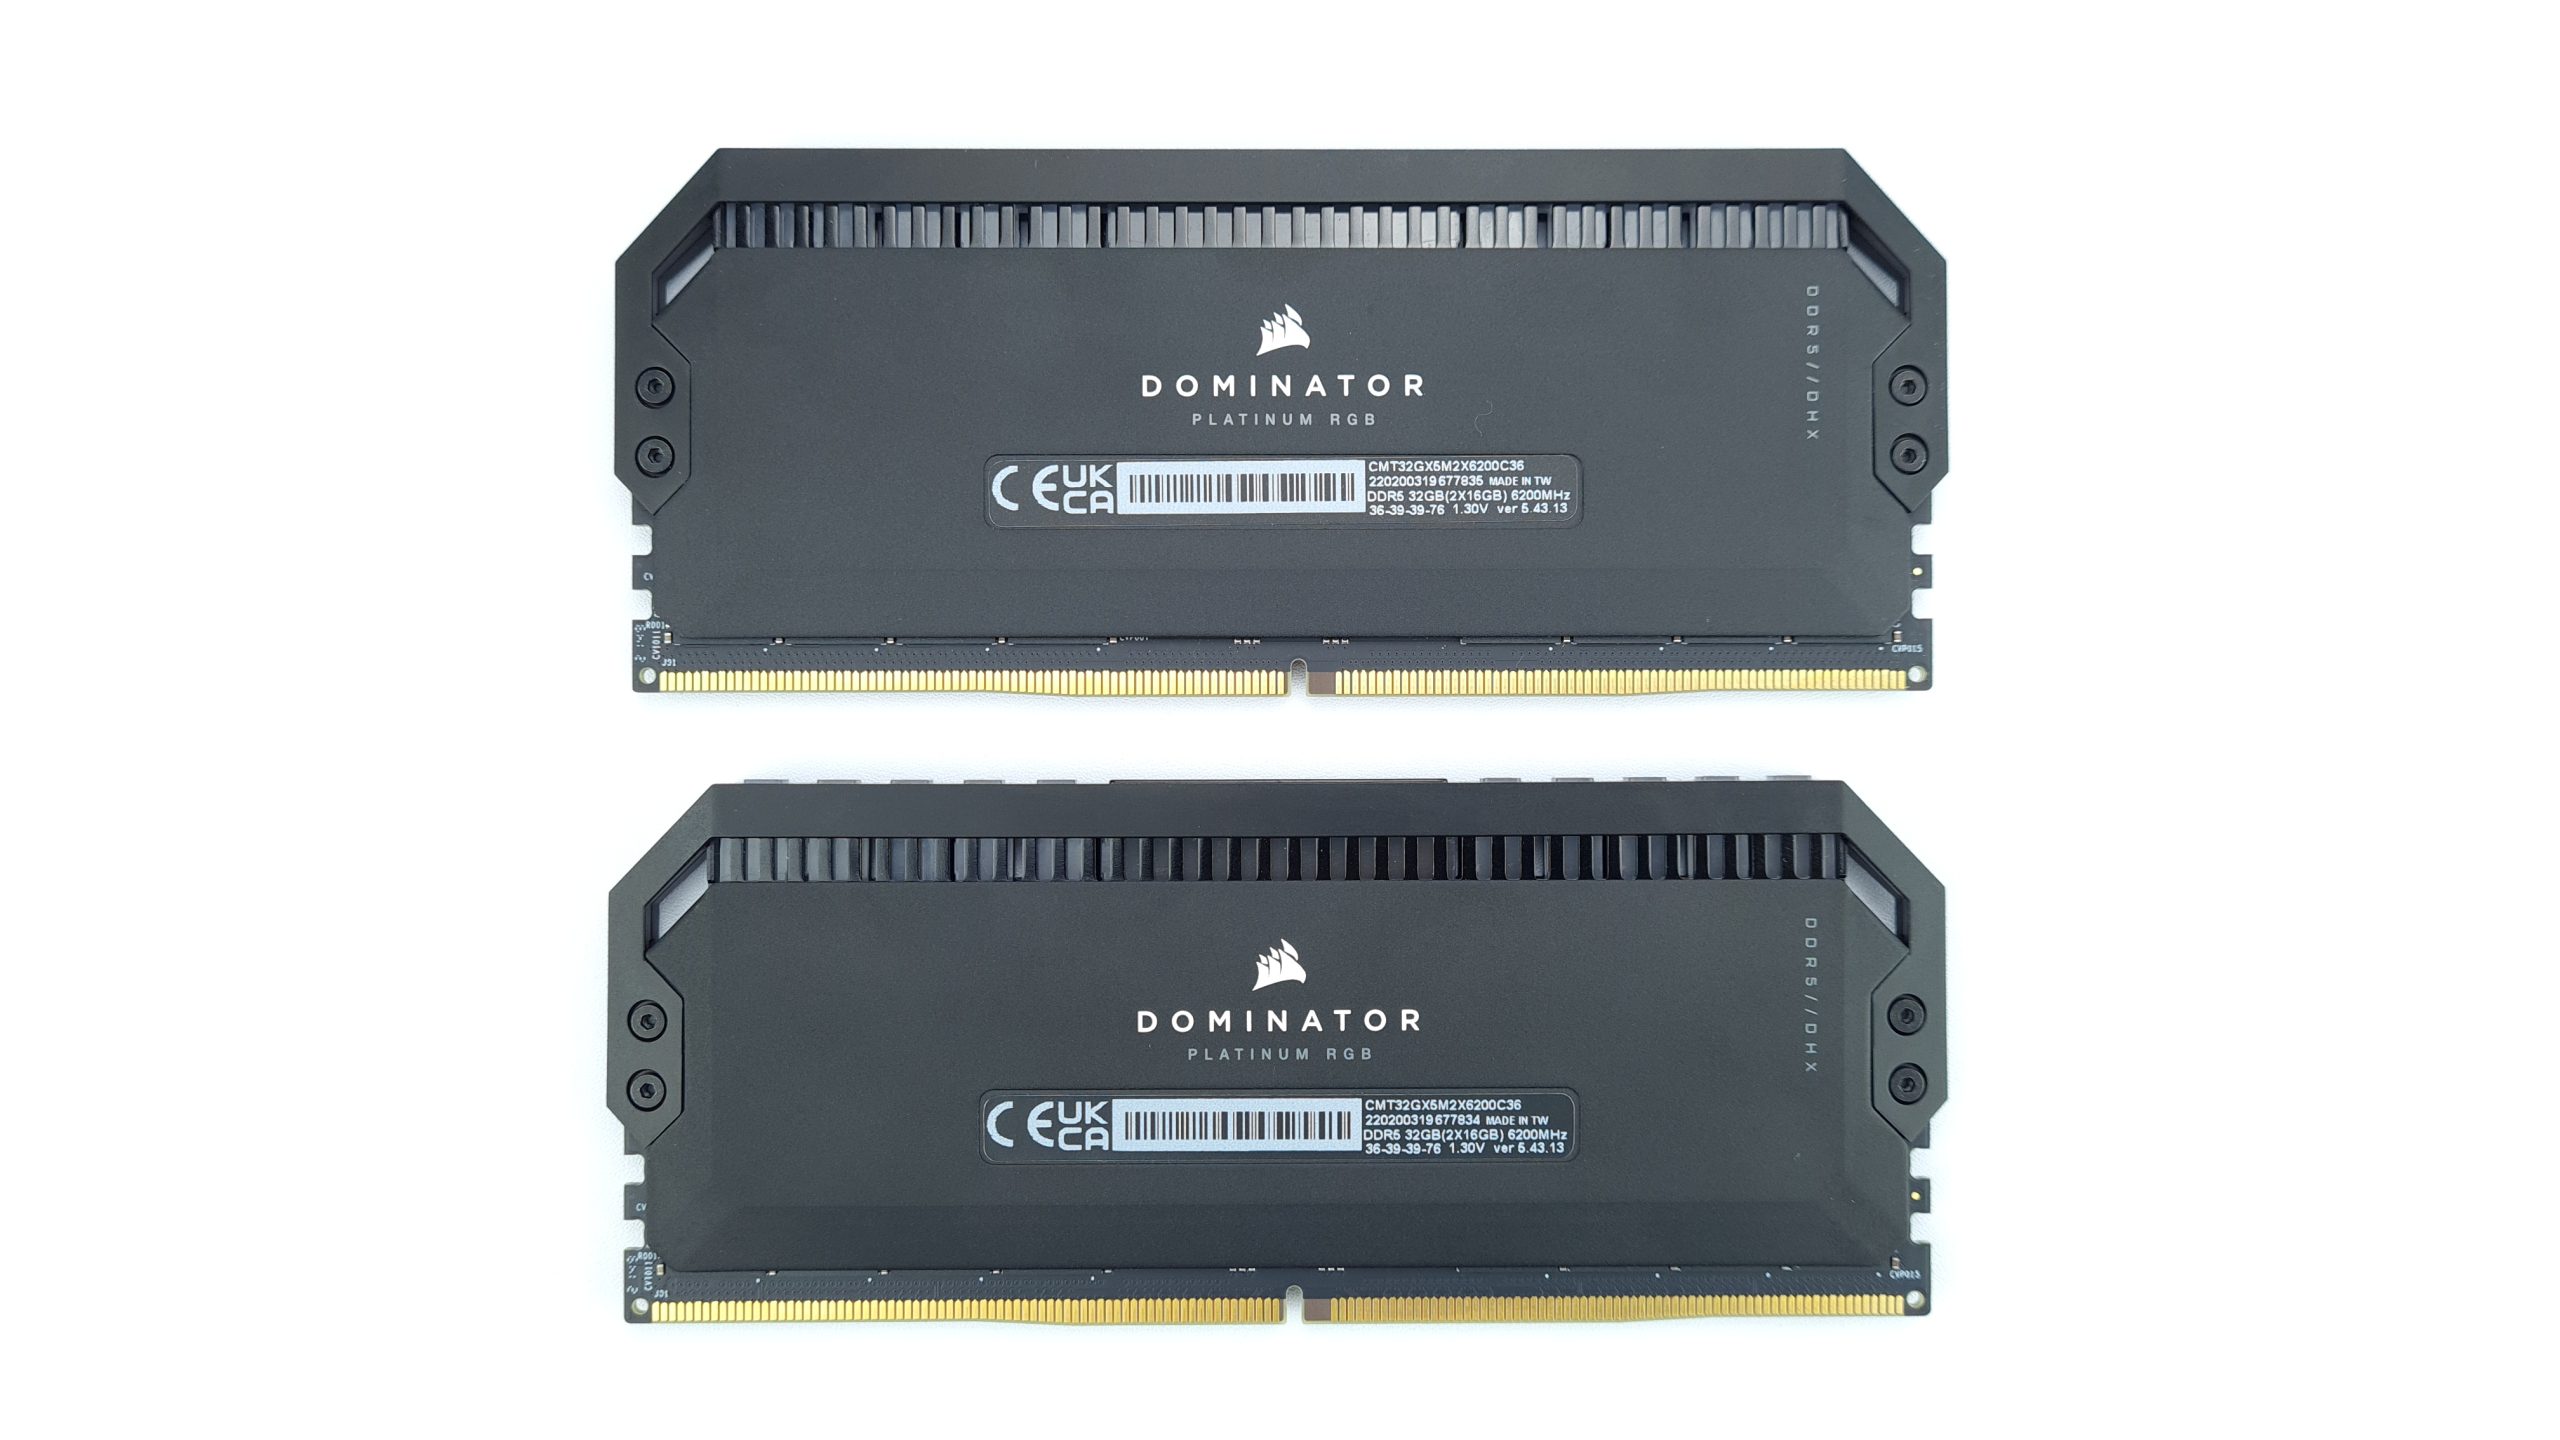 Familiar design, even faster ICs – Corsair Dominator Platinum RGB DDR5-6200  CL36 2x 16 GB kit review with teardown and OC